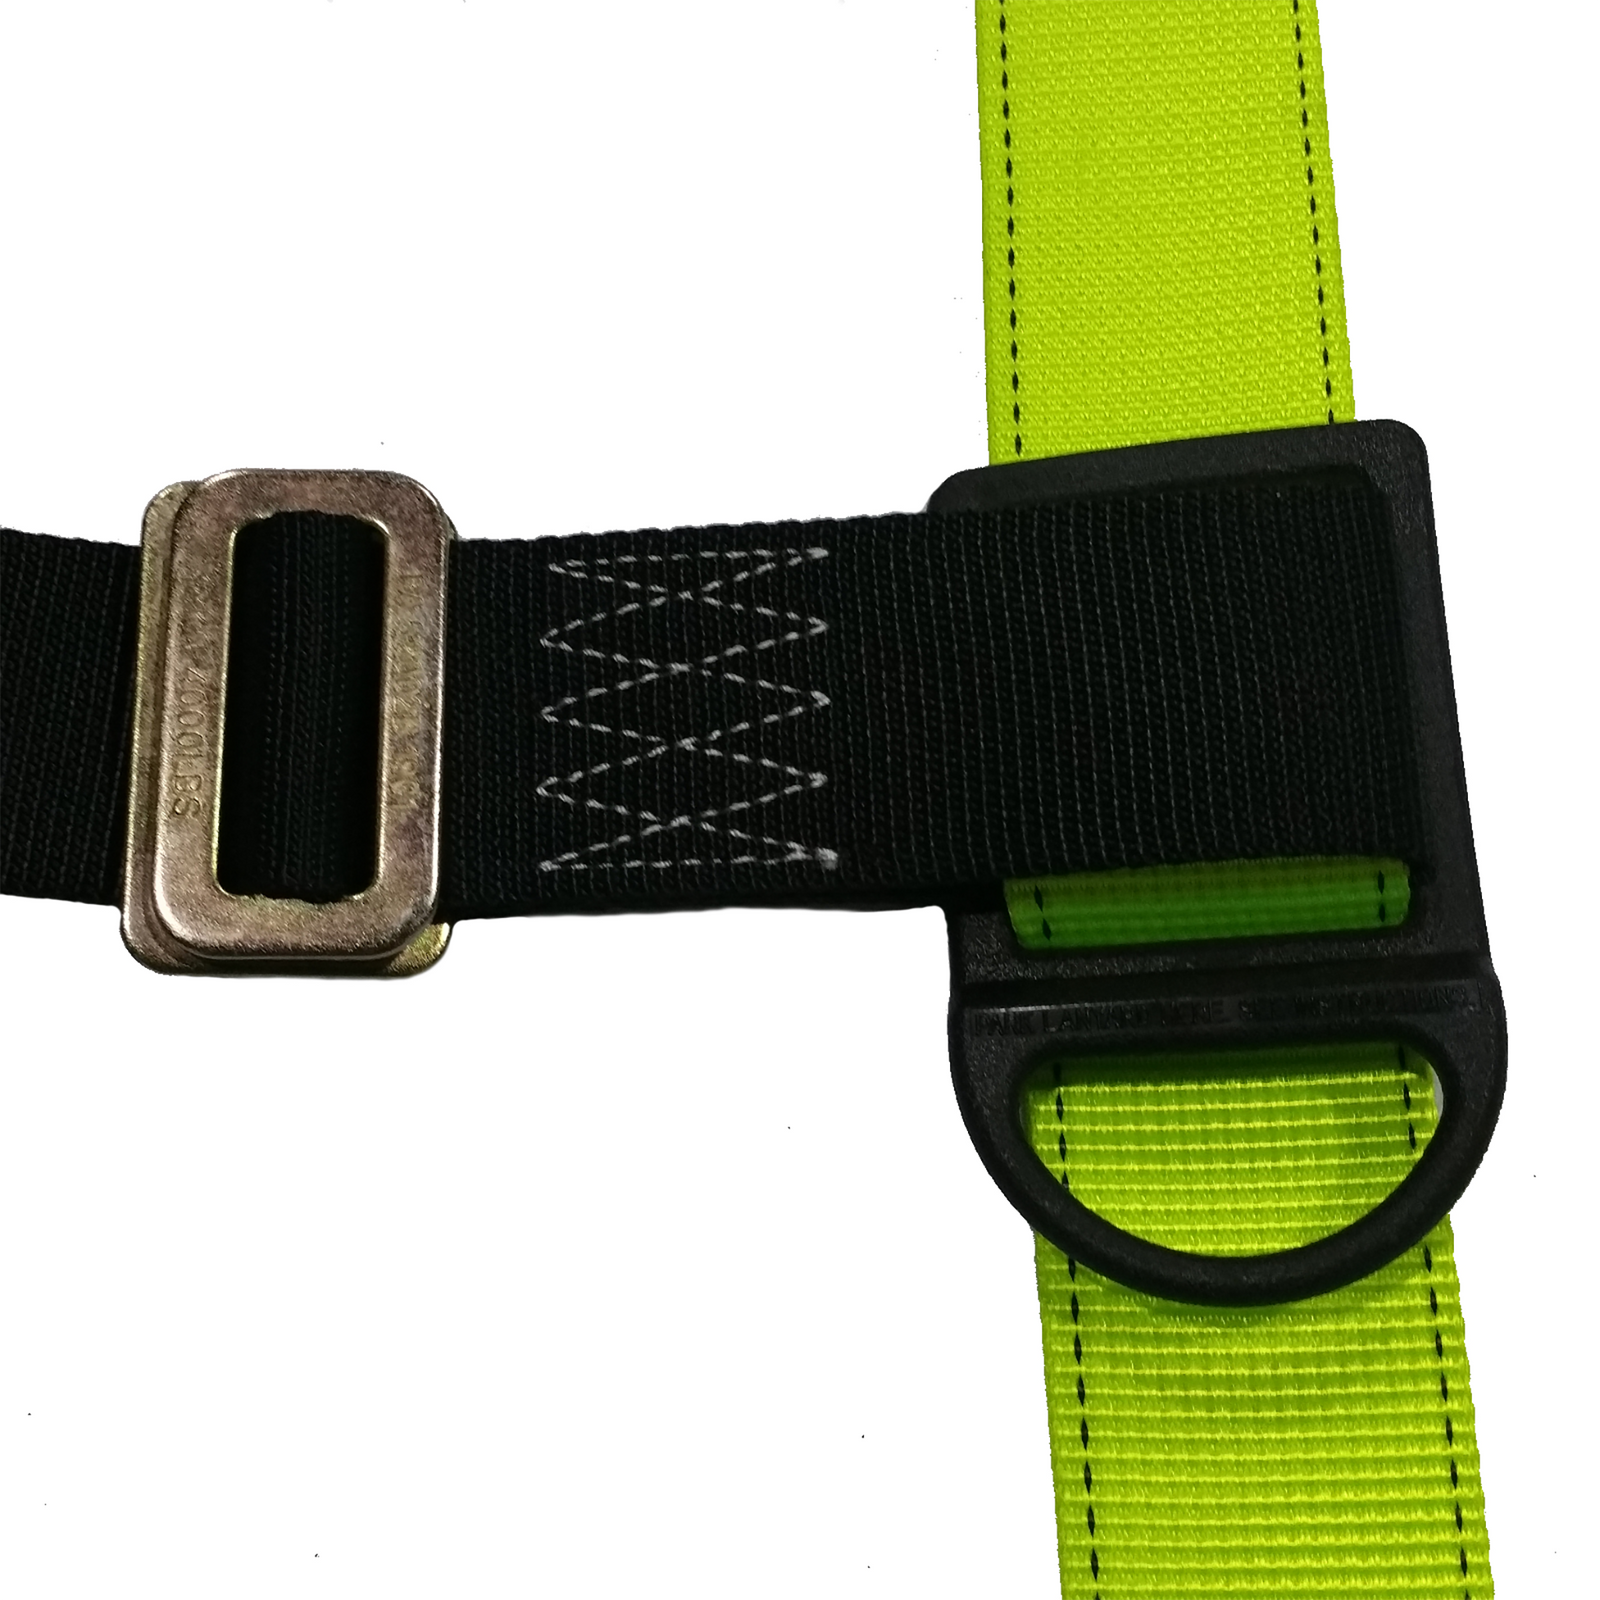 Metal chest closure on the 1 D fall protection safety body harness